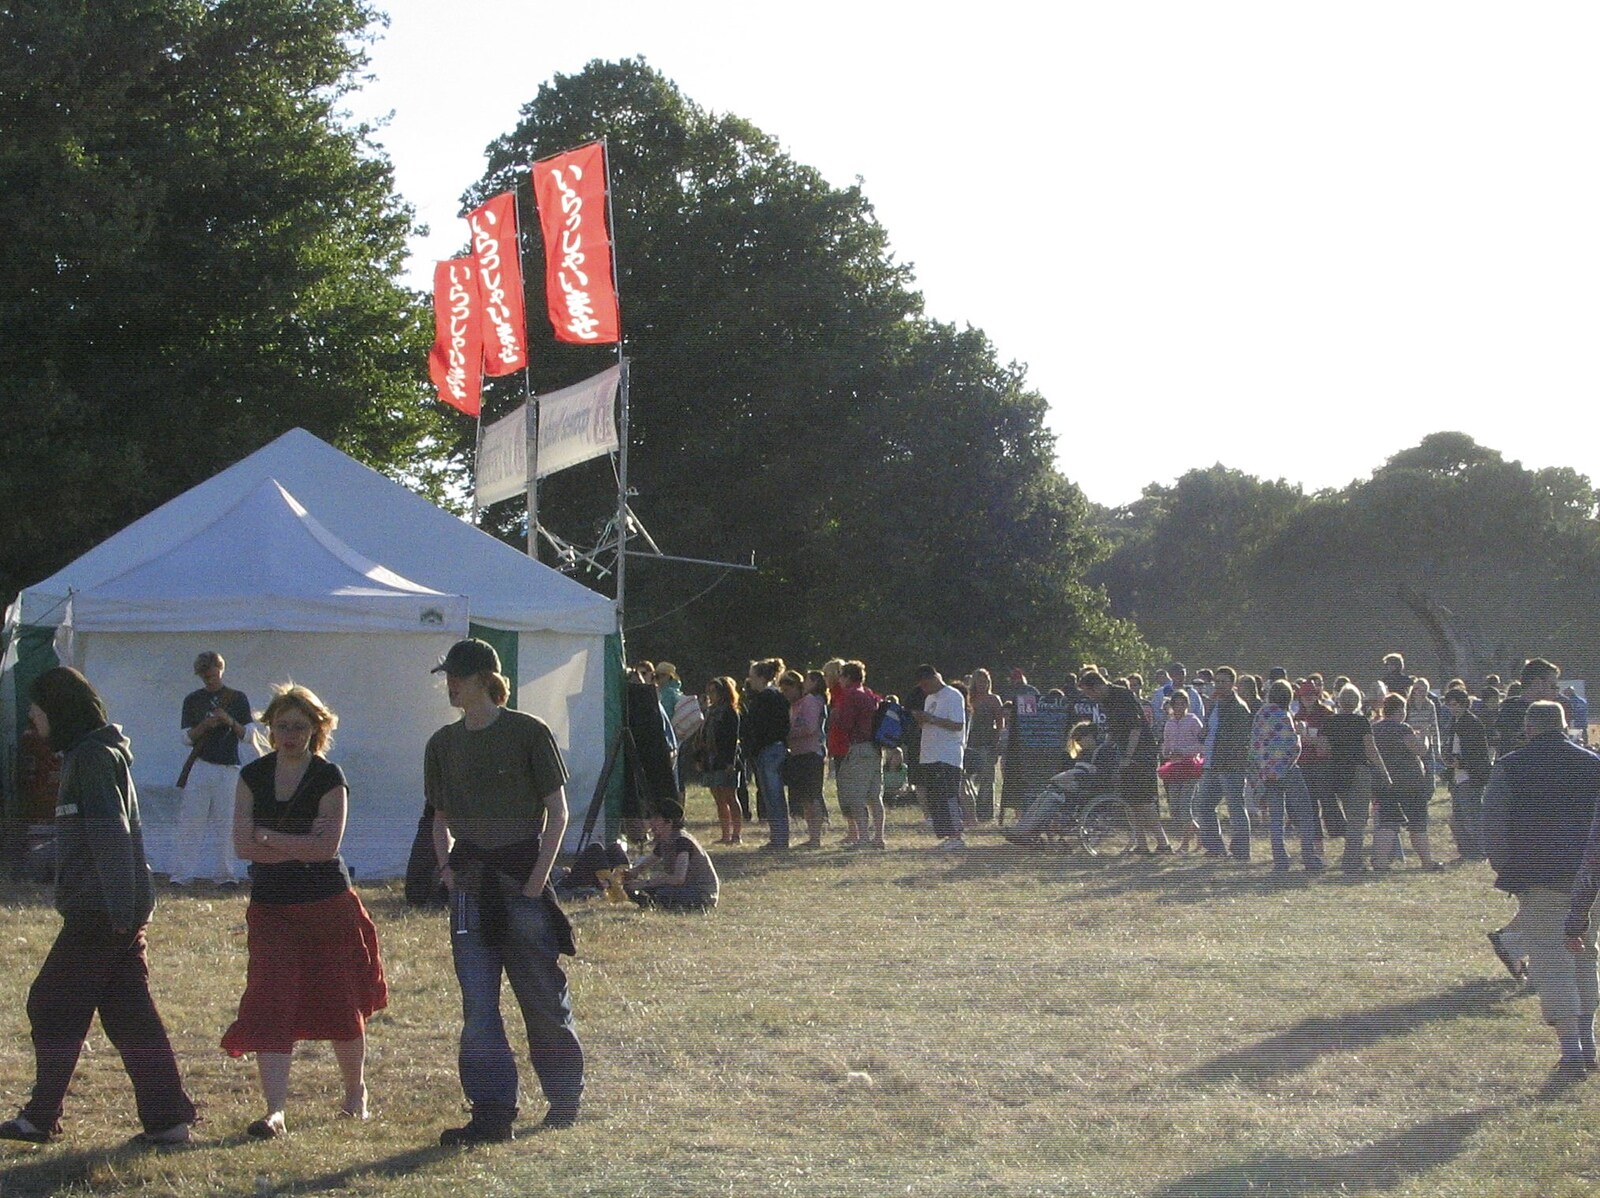 A queue for something from The First Latitude Festival, Henham Park, Suffolk - 14th July 2006